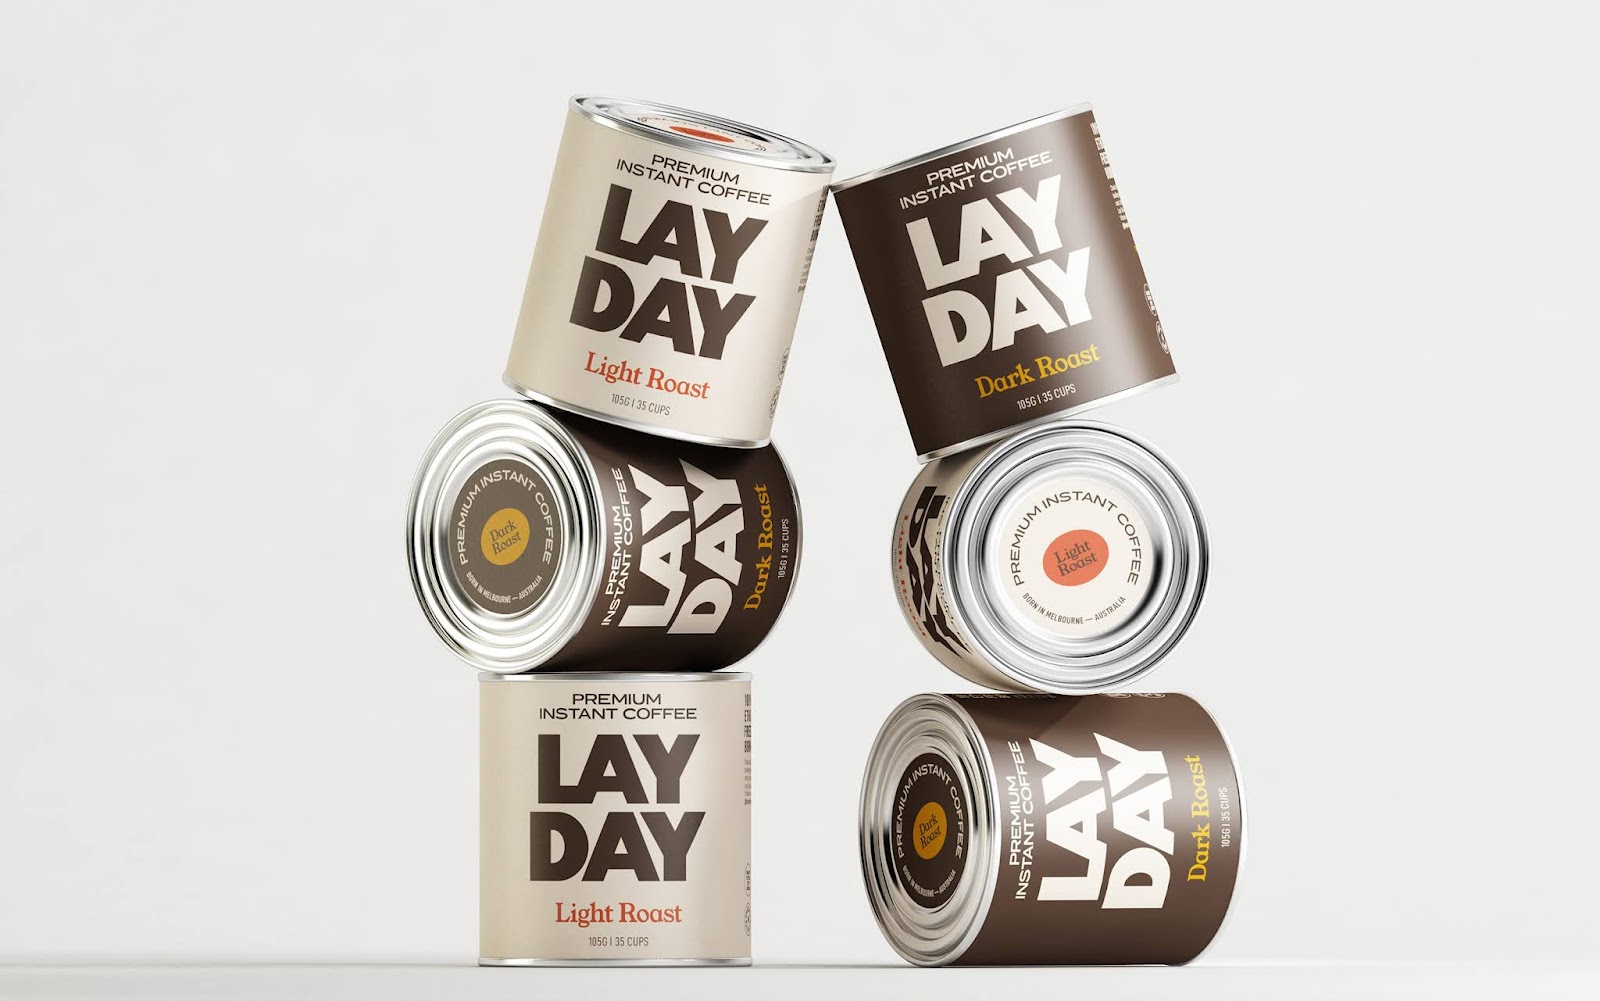 Lay Day Is Taking The No-Frills Approach And It’s Working